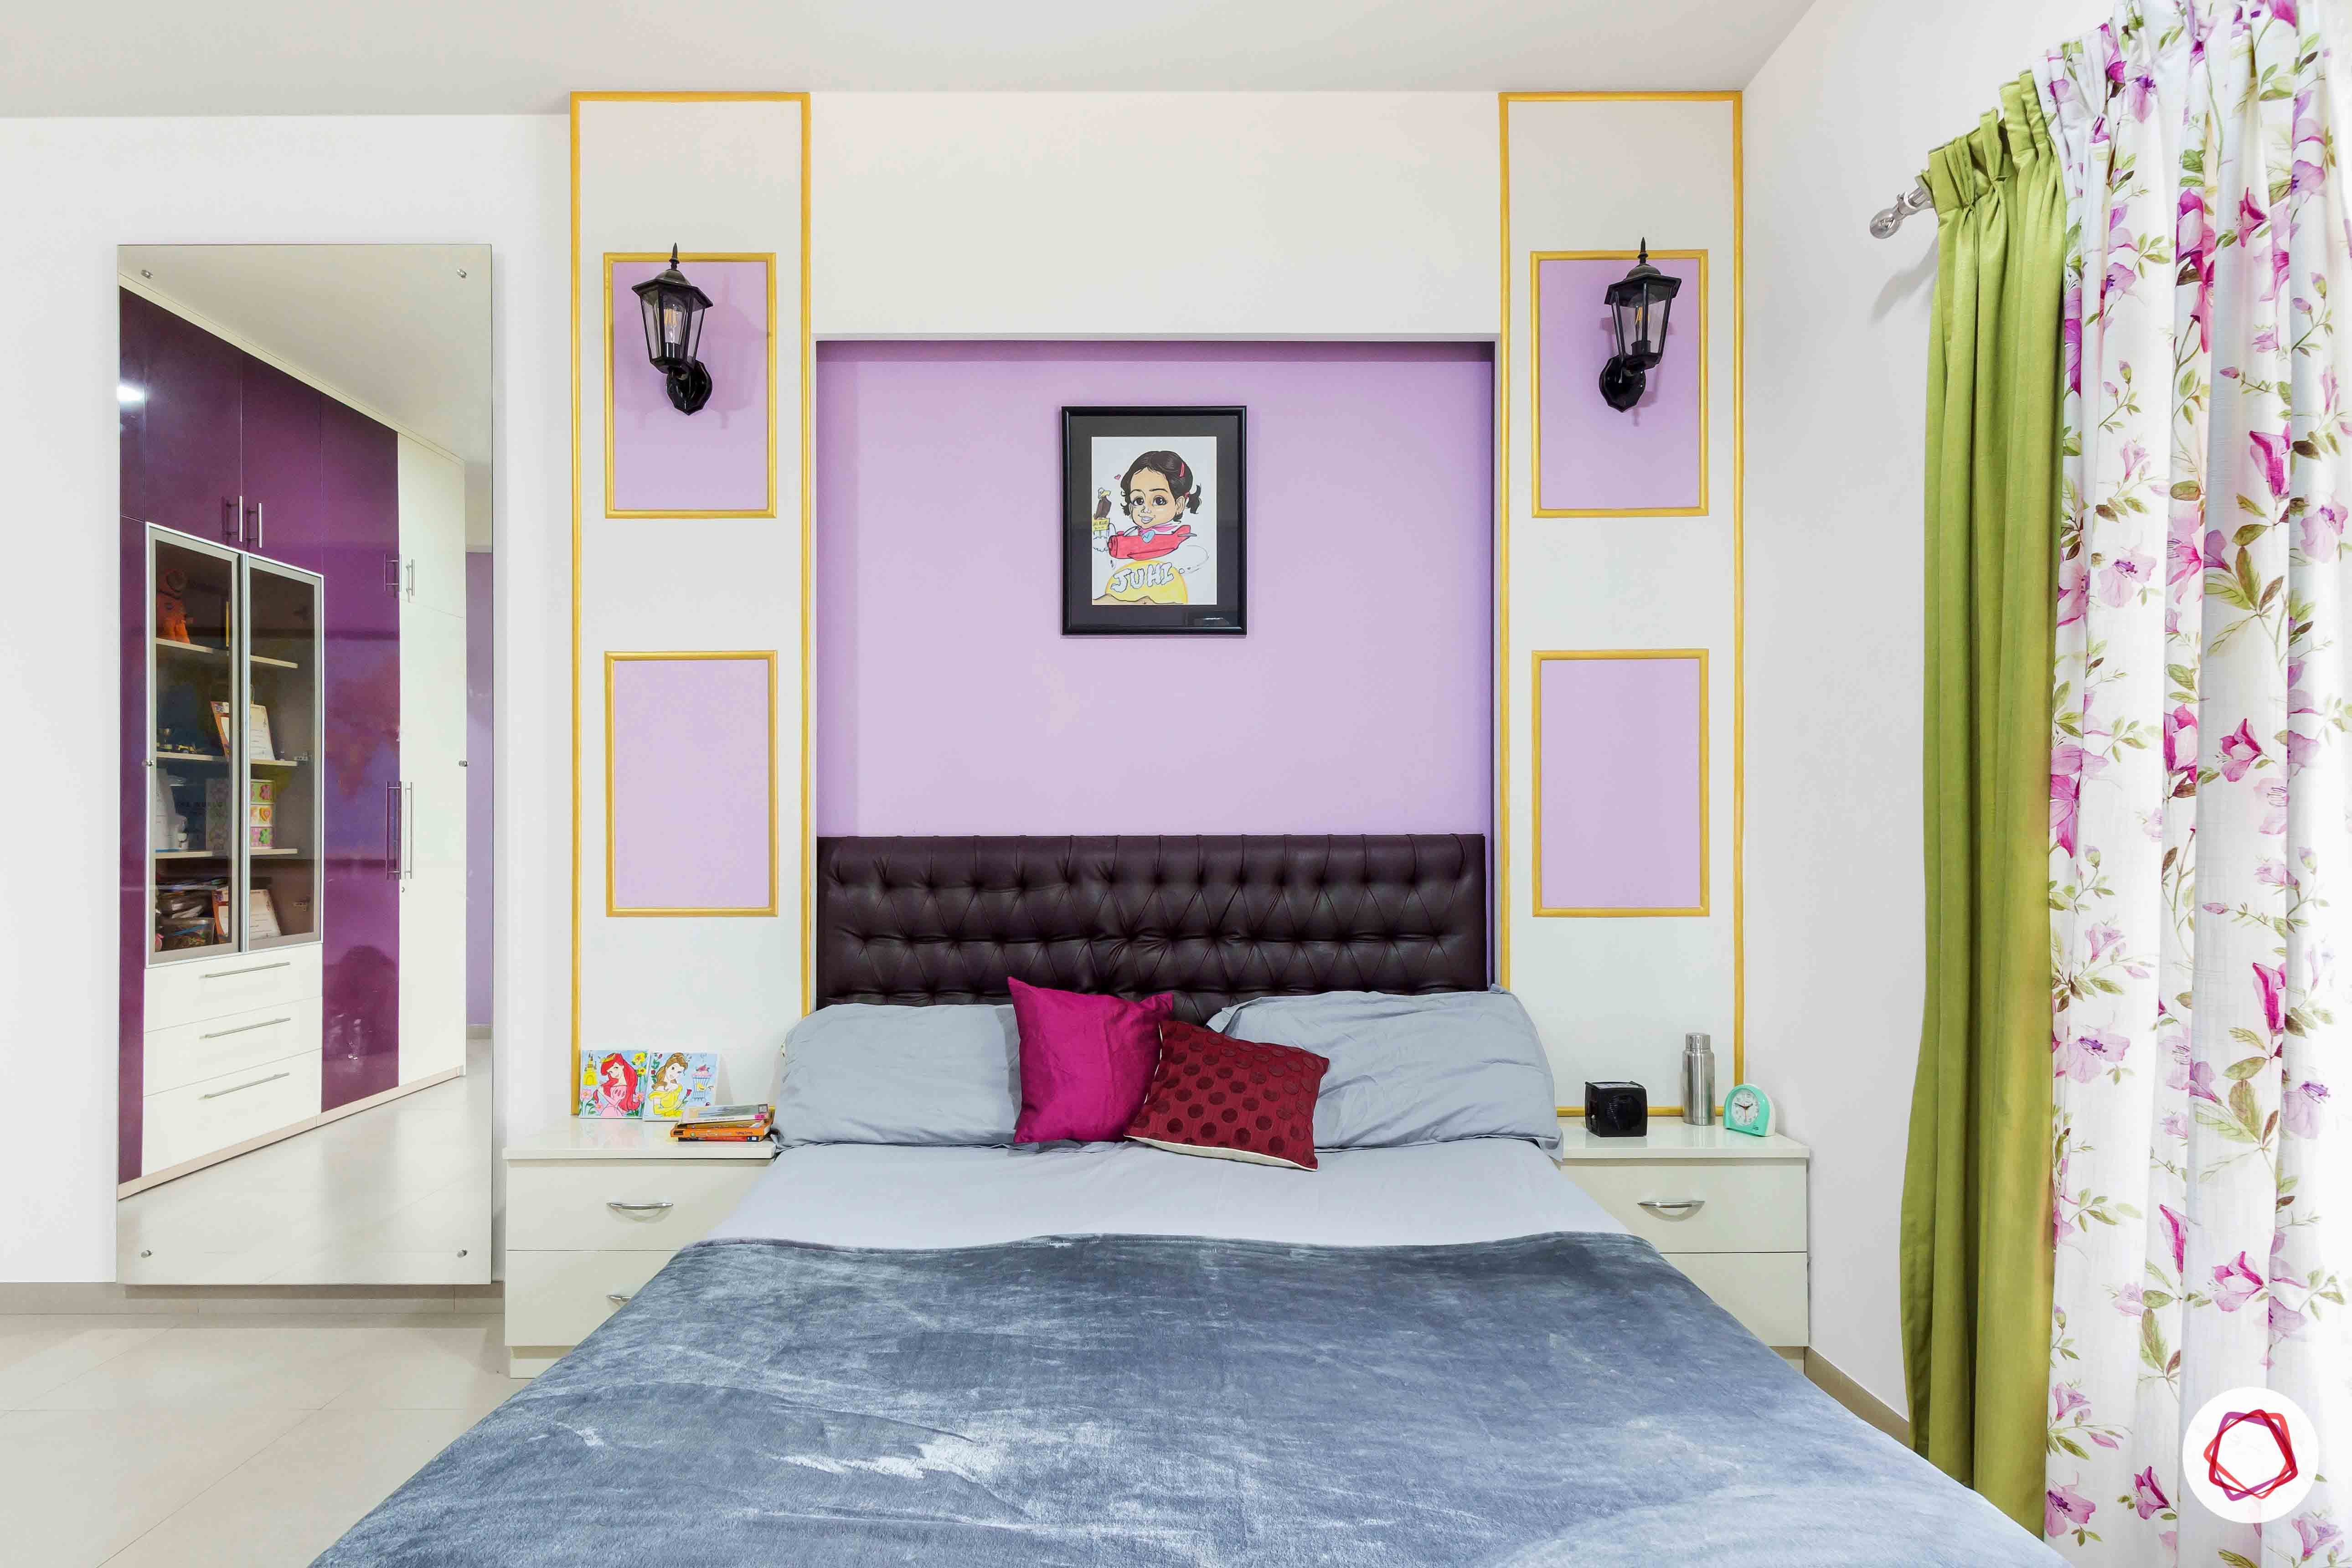 sobha forest view-girls bedroom-purple room-white side tables-tufted headboard-wall lamps